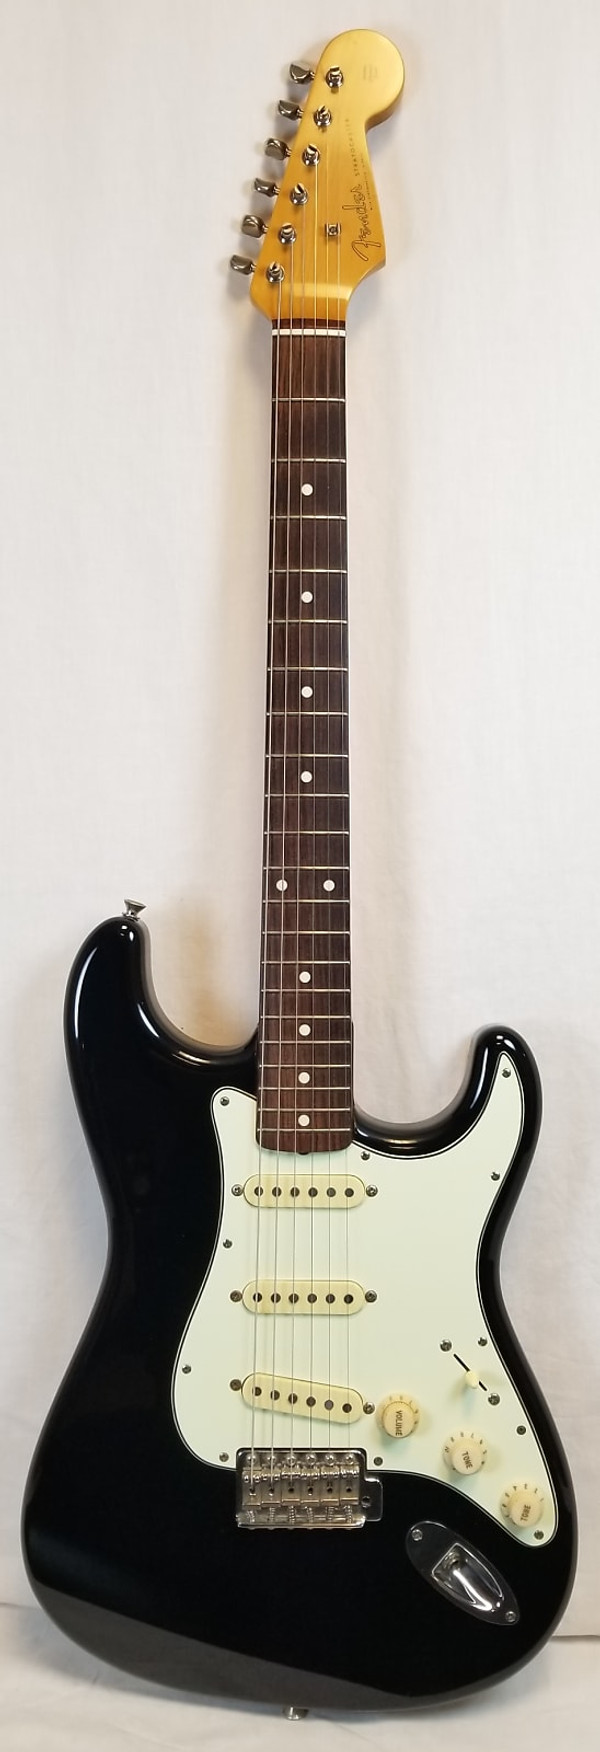 Pre Owned 50th Anniversary Fender Vintage Reissue 60's Stratocaster Electric Guitar, Black W/Case Made In Japan